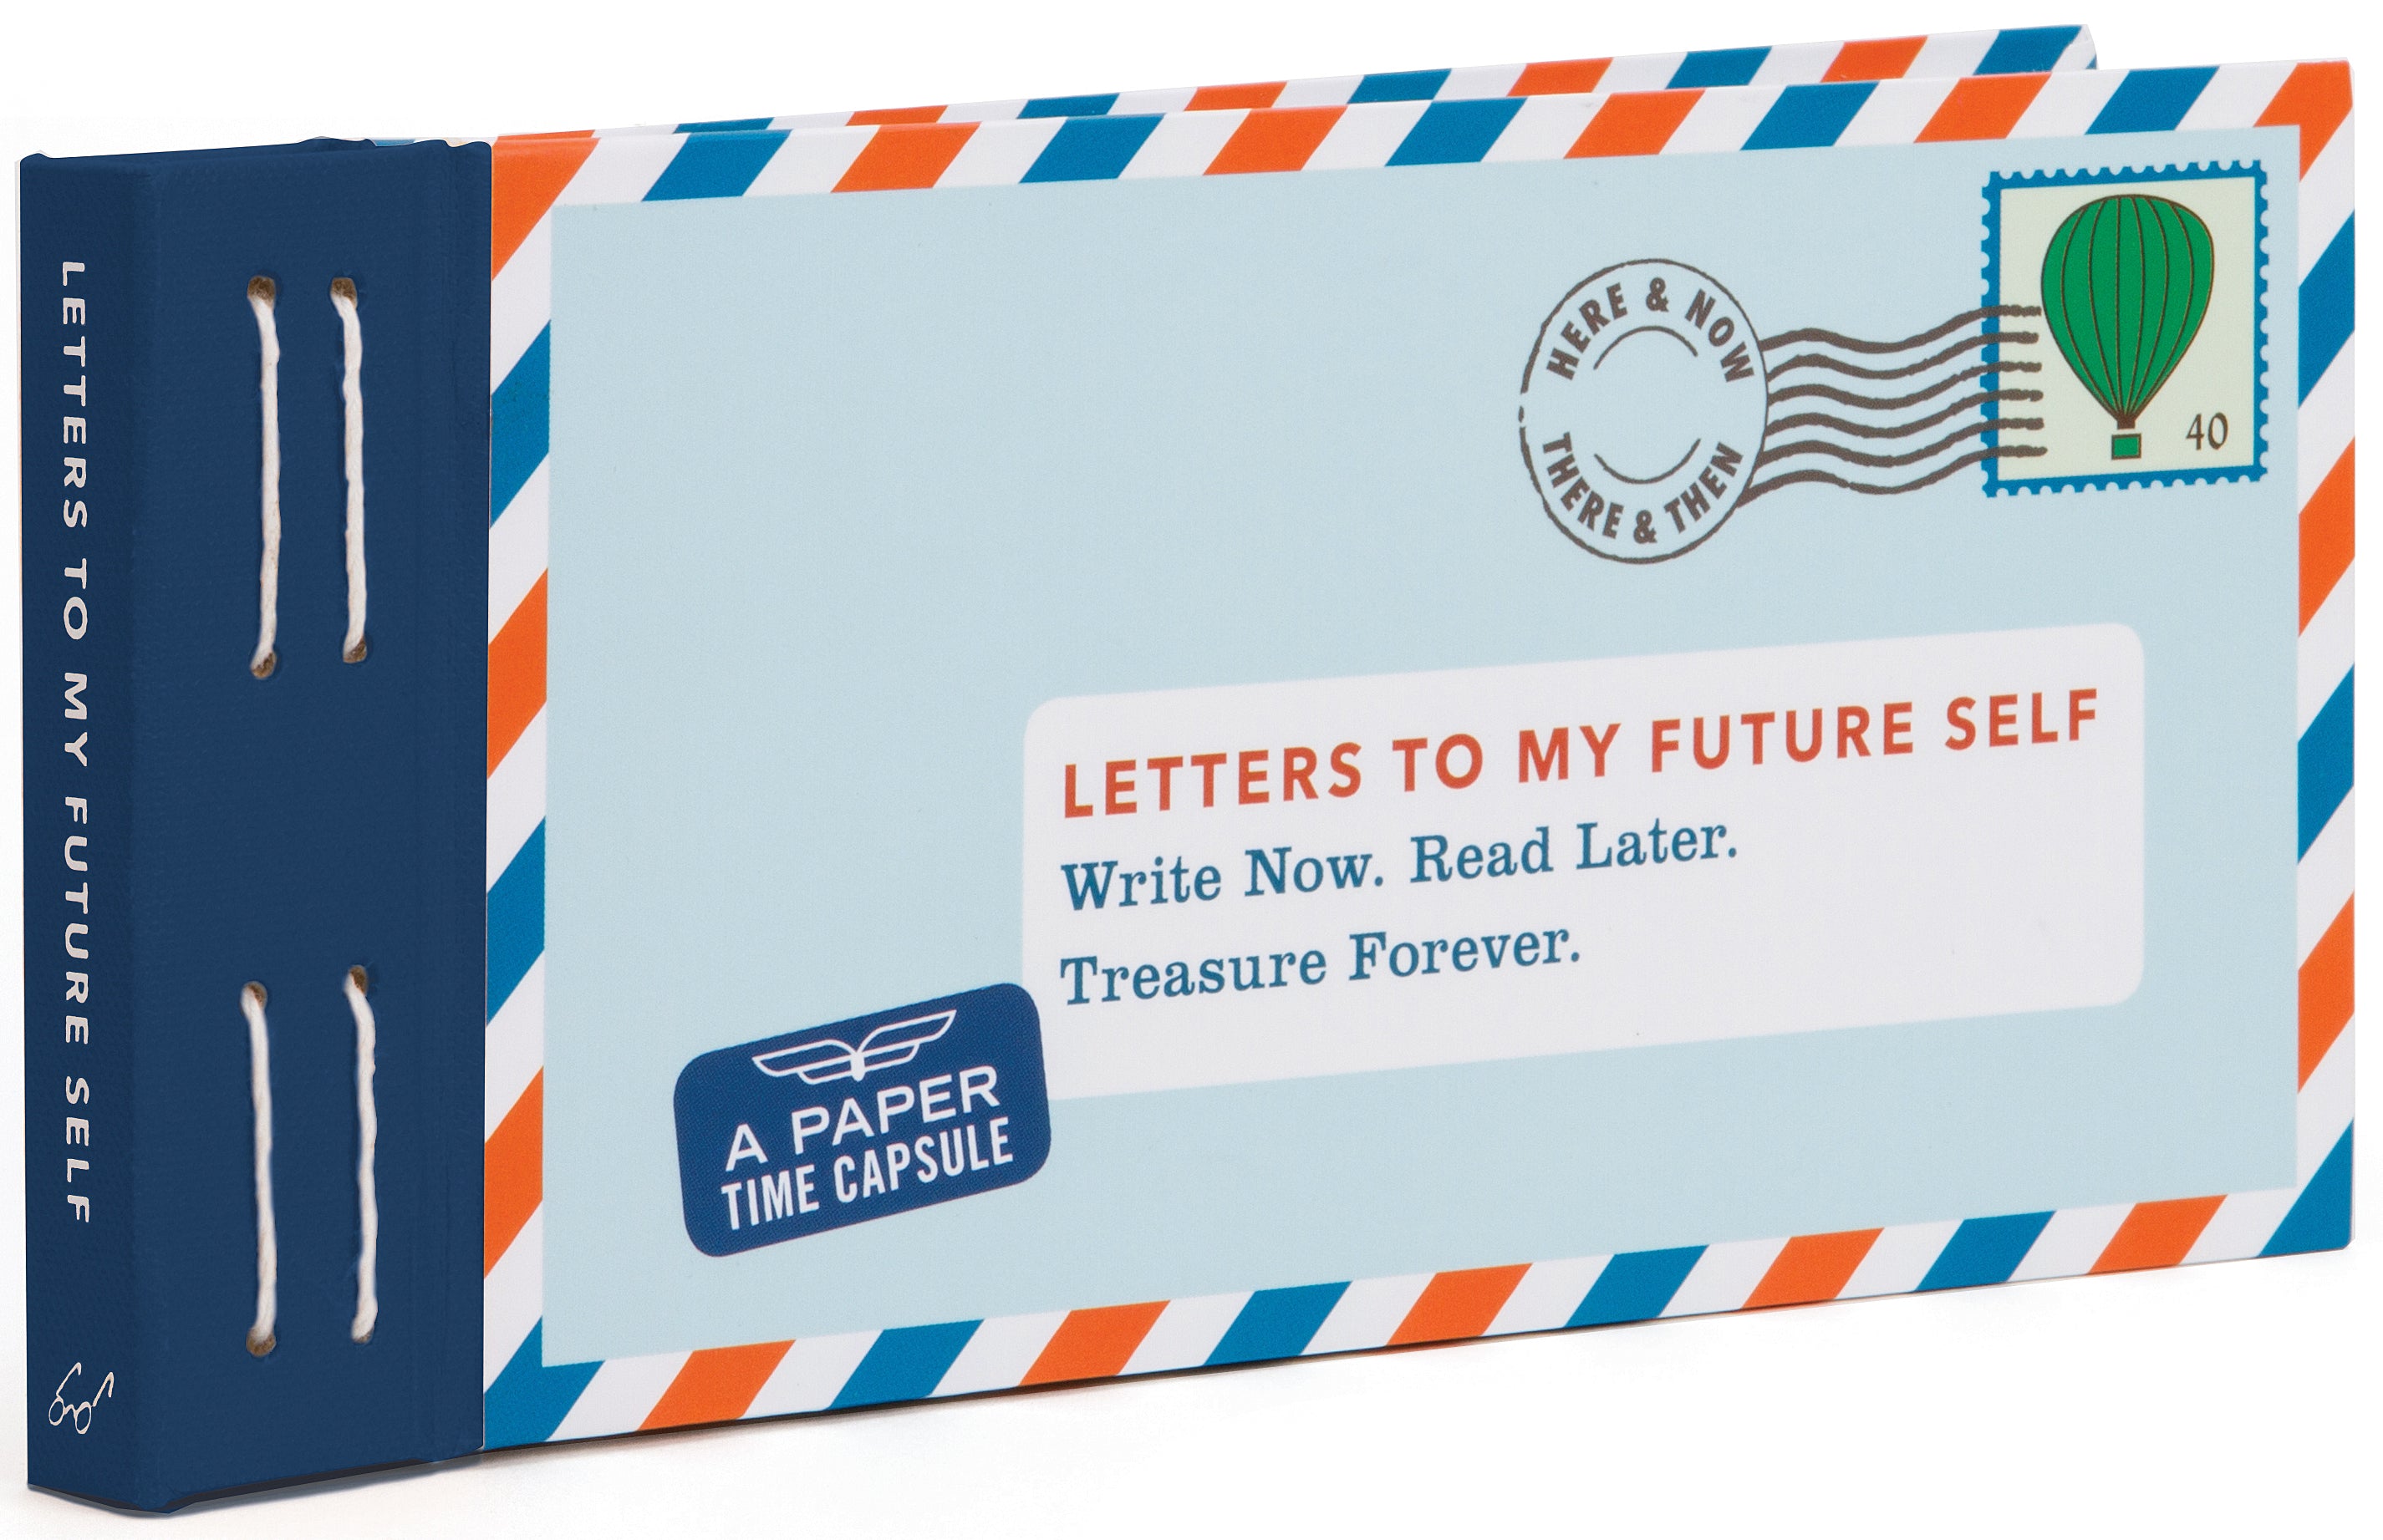 A Letter to my Future self. Letter to your Future self. Letter for Future me. Letter to Future me. This letter write now